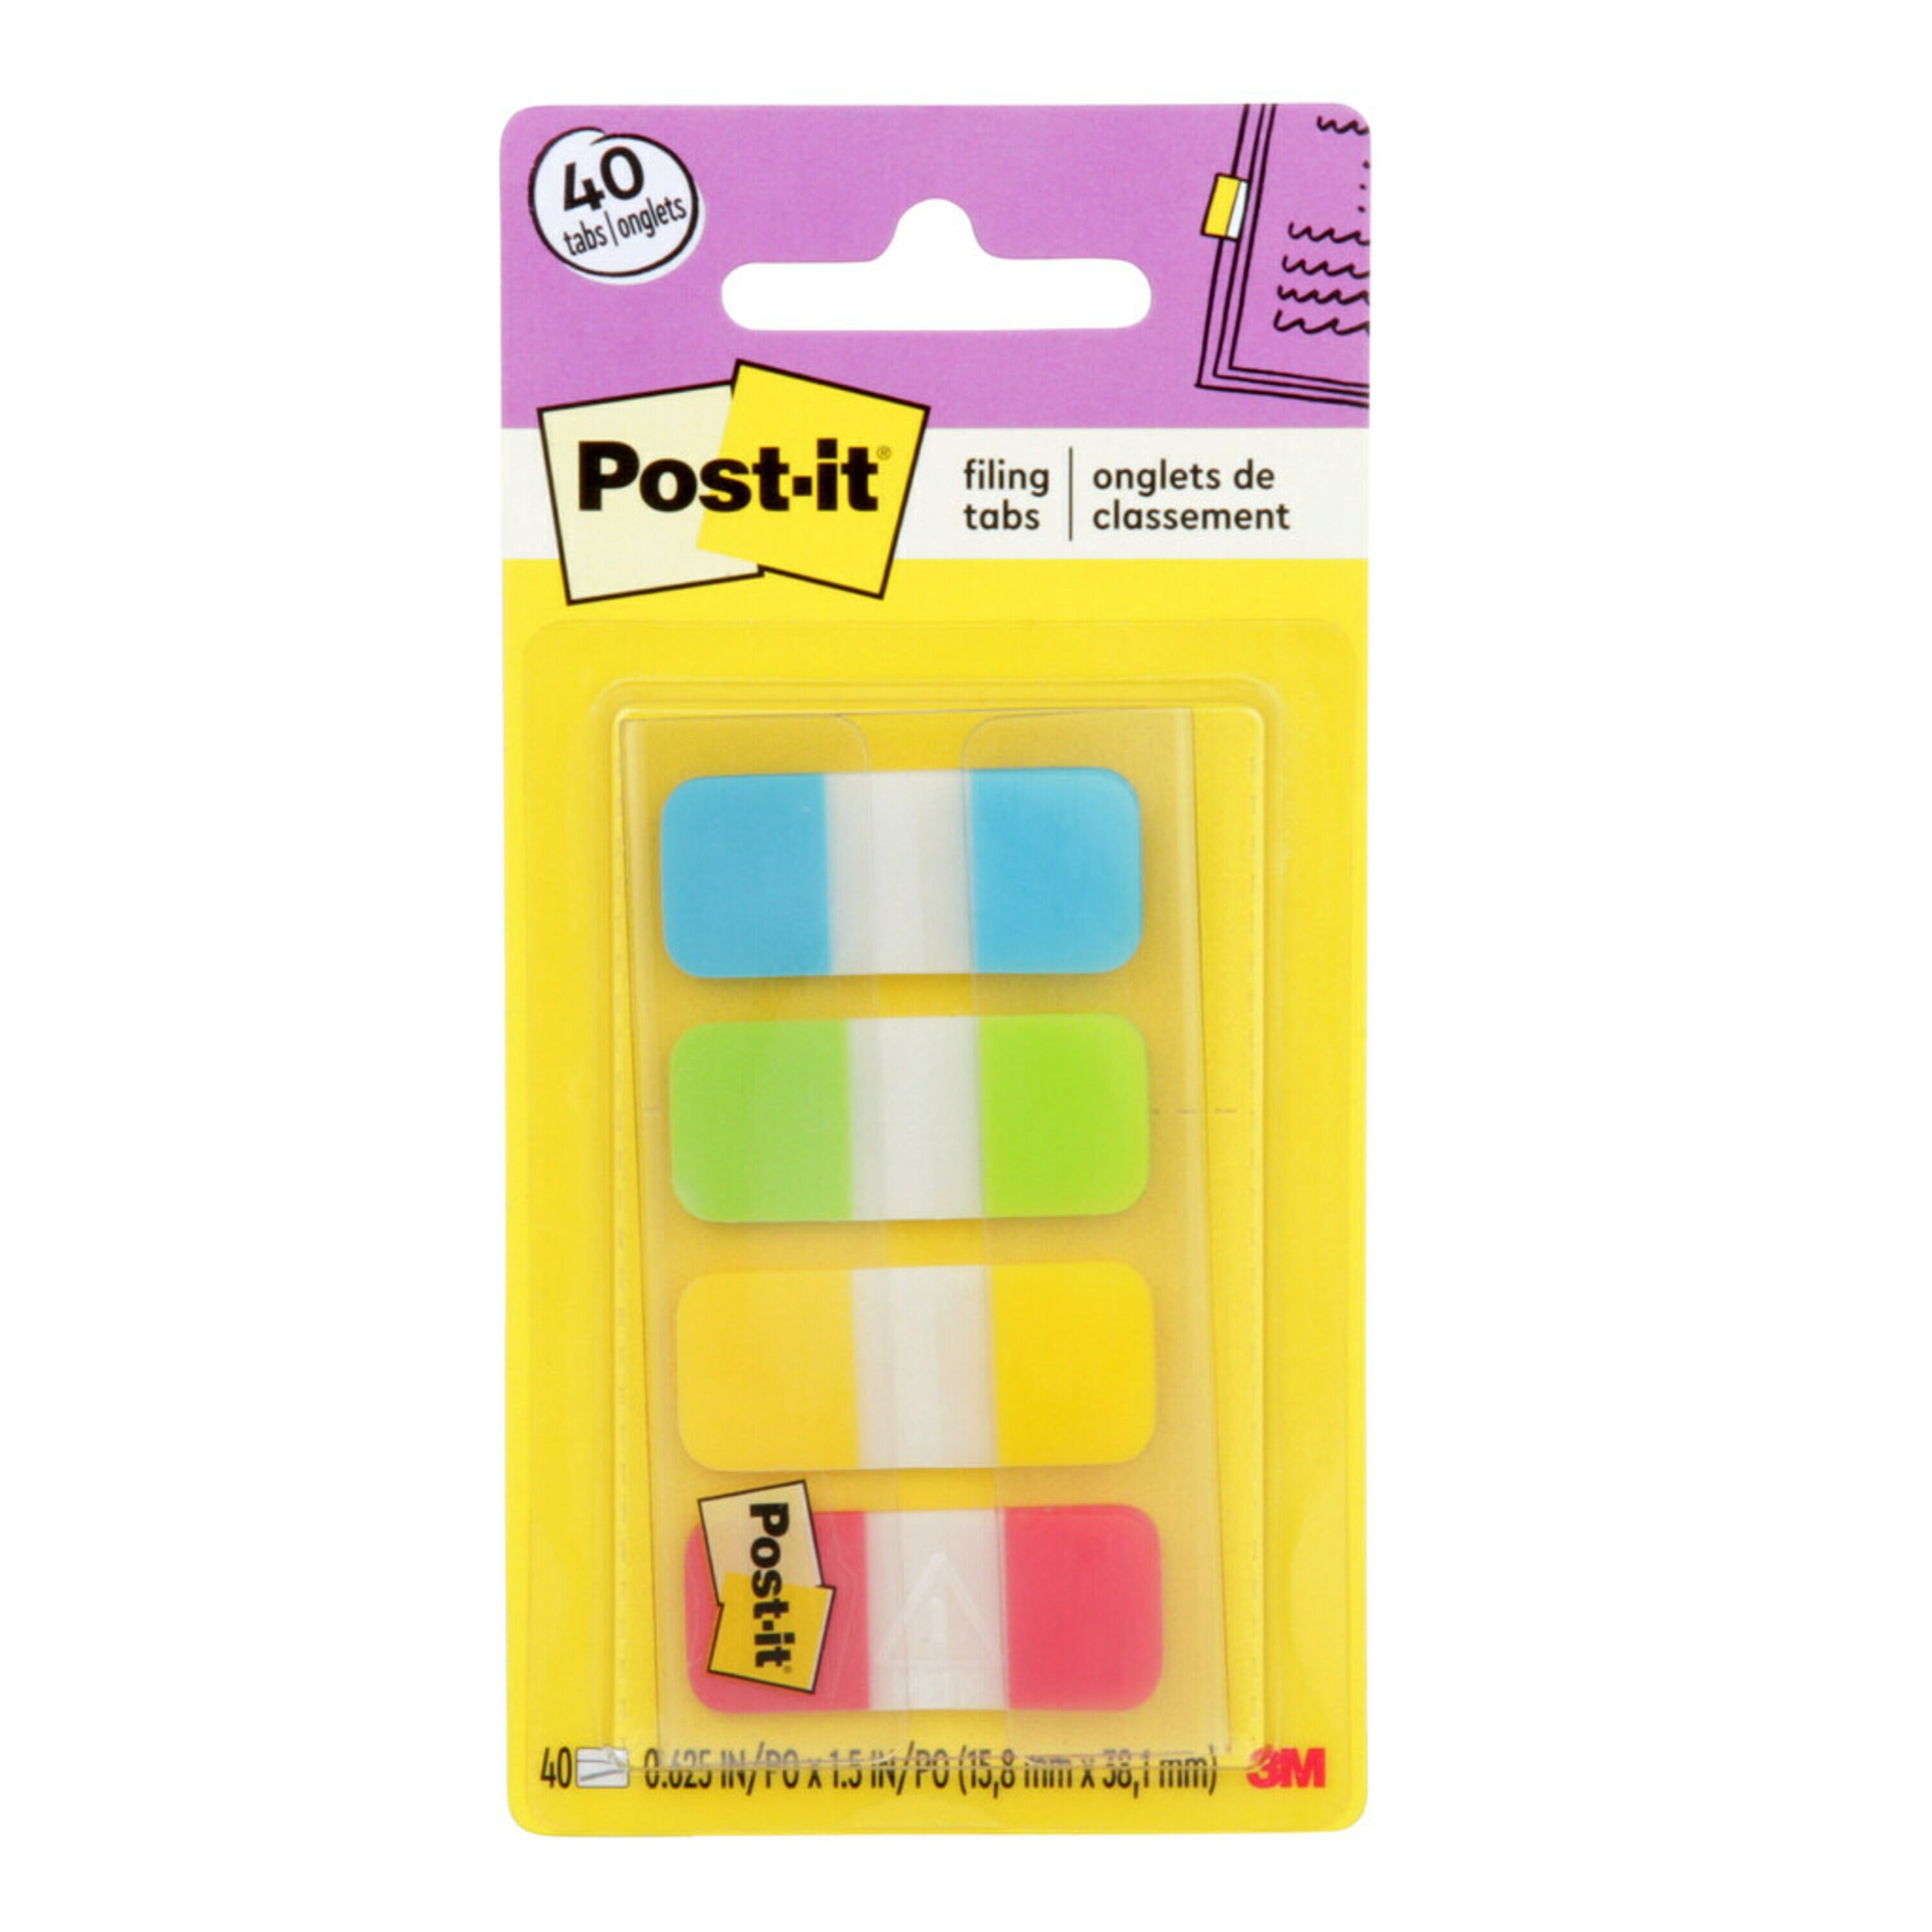 500 Sheets 16 Pads Transparent Sticky Notes Tabs, WeGuard Clear Sticky  Notes Post-it 3x3 inch Self-Stick Note Pads Bright Colors Memo Pads,  Waterproof 